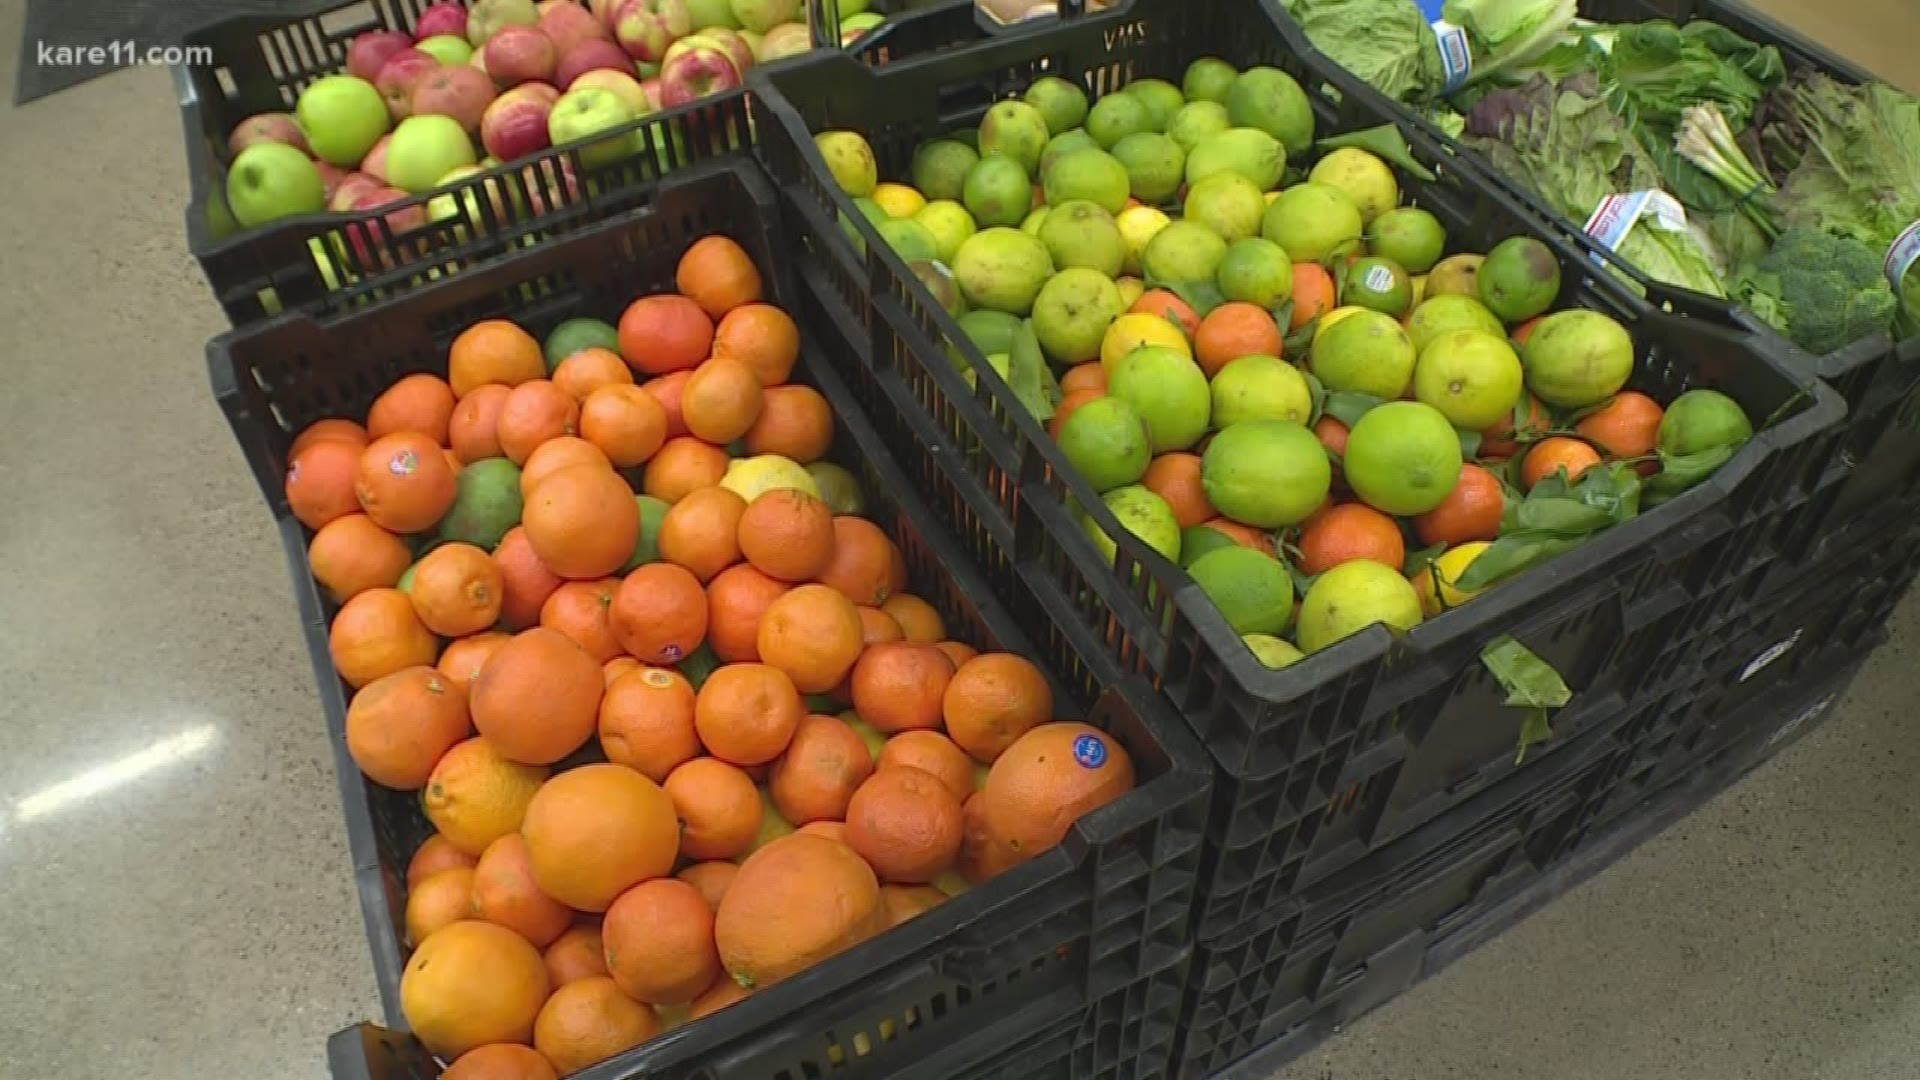 More food shelves across Minnesota and western Wisconsin are transforming to encourage their clients to make healthier choices. It's called the SuperShelf model. KARE 11's Heidi Wigdahl explains how it works.